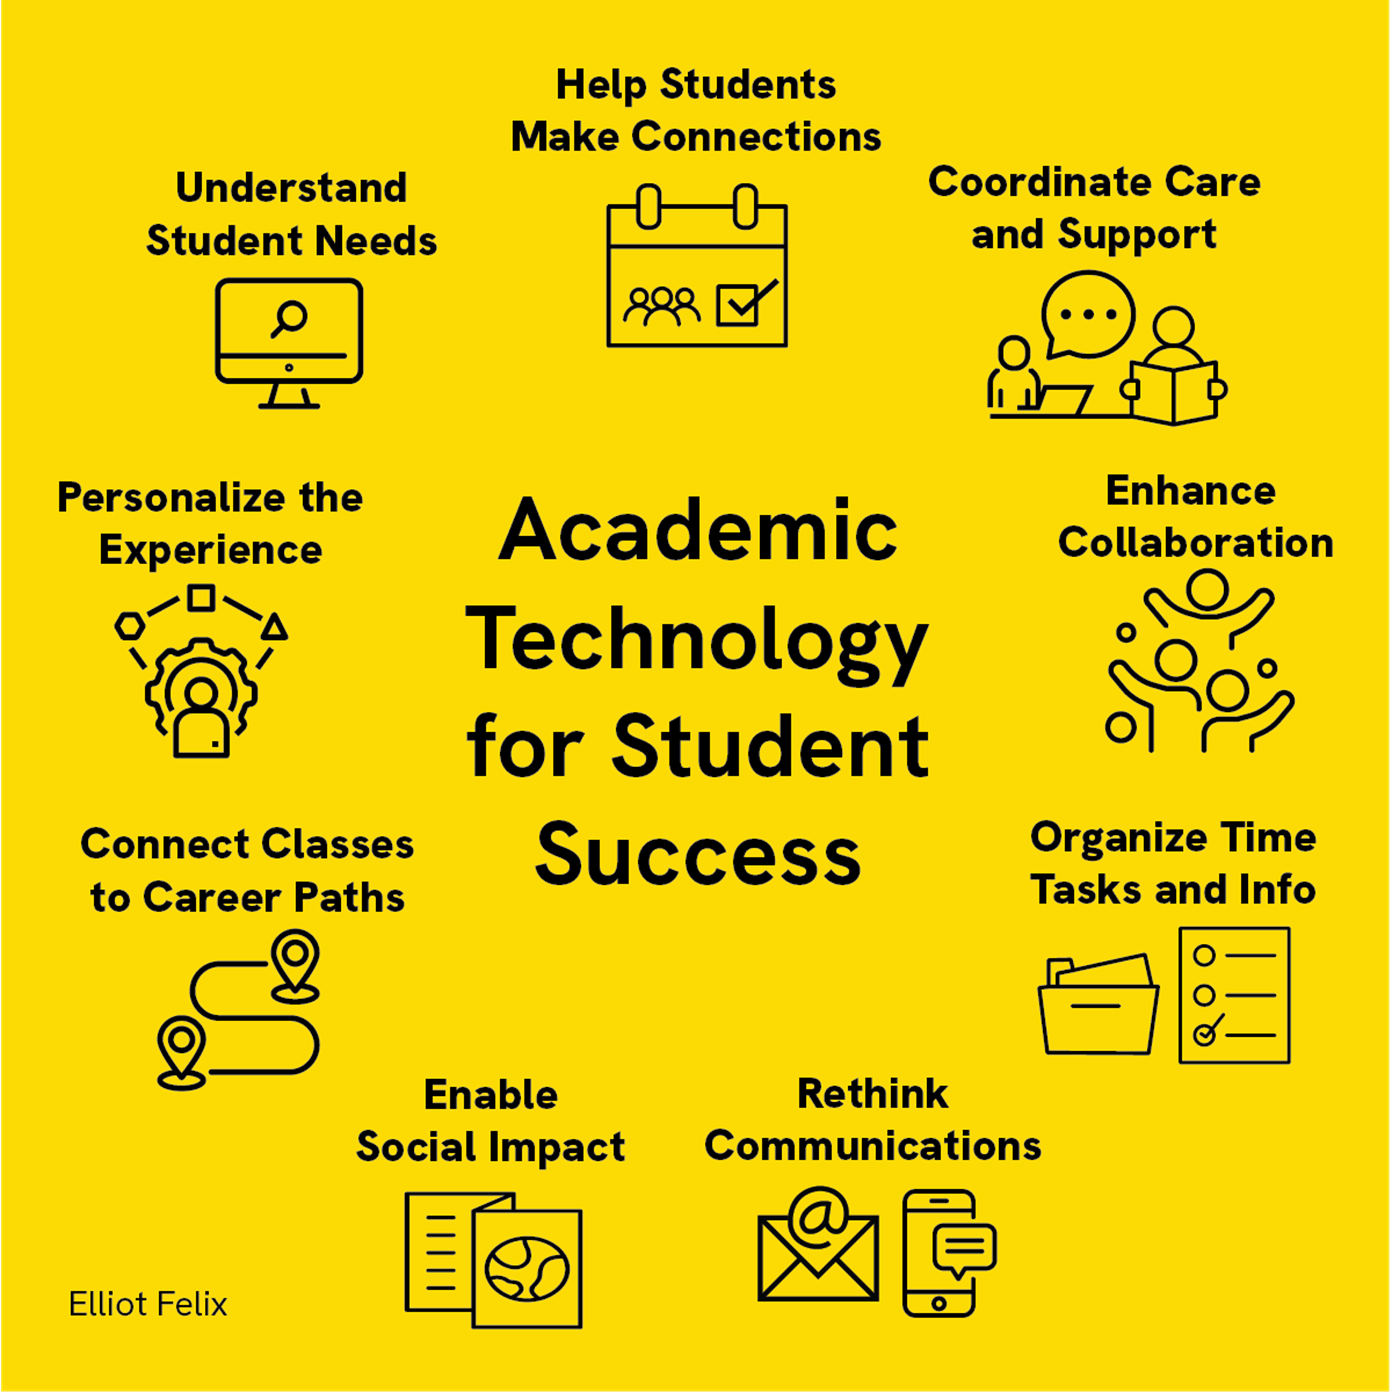 Academic Technology for Student Success. Understand Student Needs; Help Students Make Connections; Coordinate Care and Support; Enhance Collaboration; Organize Time, Tasks, and Info; Rethink Communications; Enable Social Impact; Connect Classes to Career Paths; Personalize the Experience. 